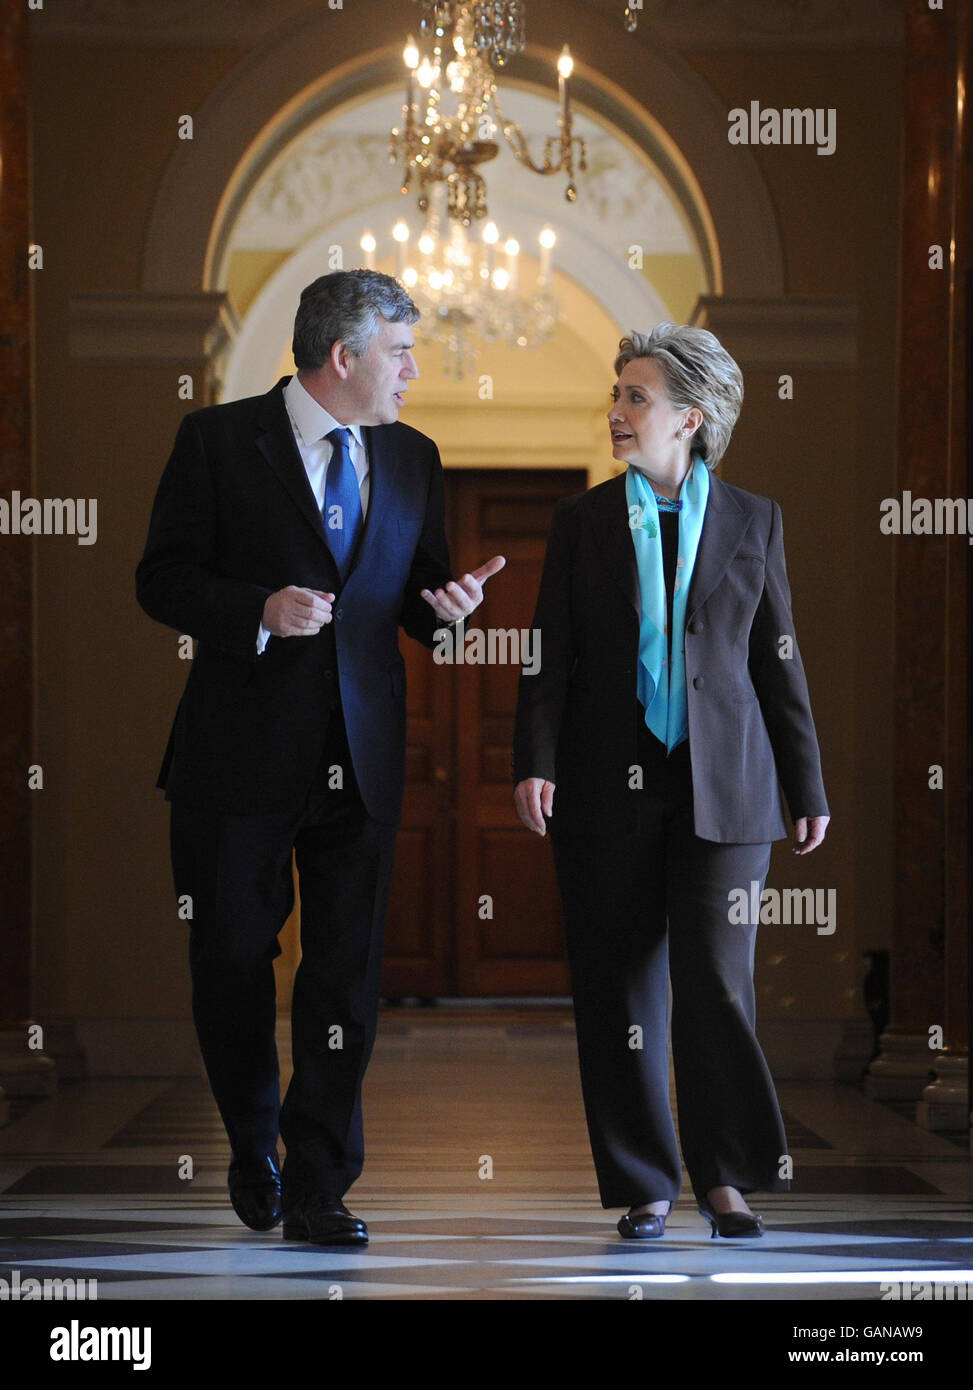 Britain's Prime Minister Gordon Brown meets Democrat Presidential candidate Hilary Clinton at the British Residence in Washington DC today, on the second day of his three day visit to the U.S. Stock Photo